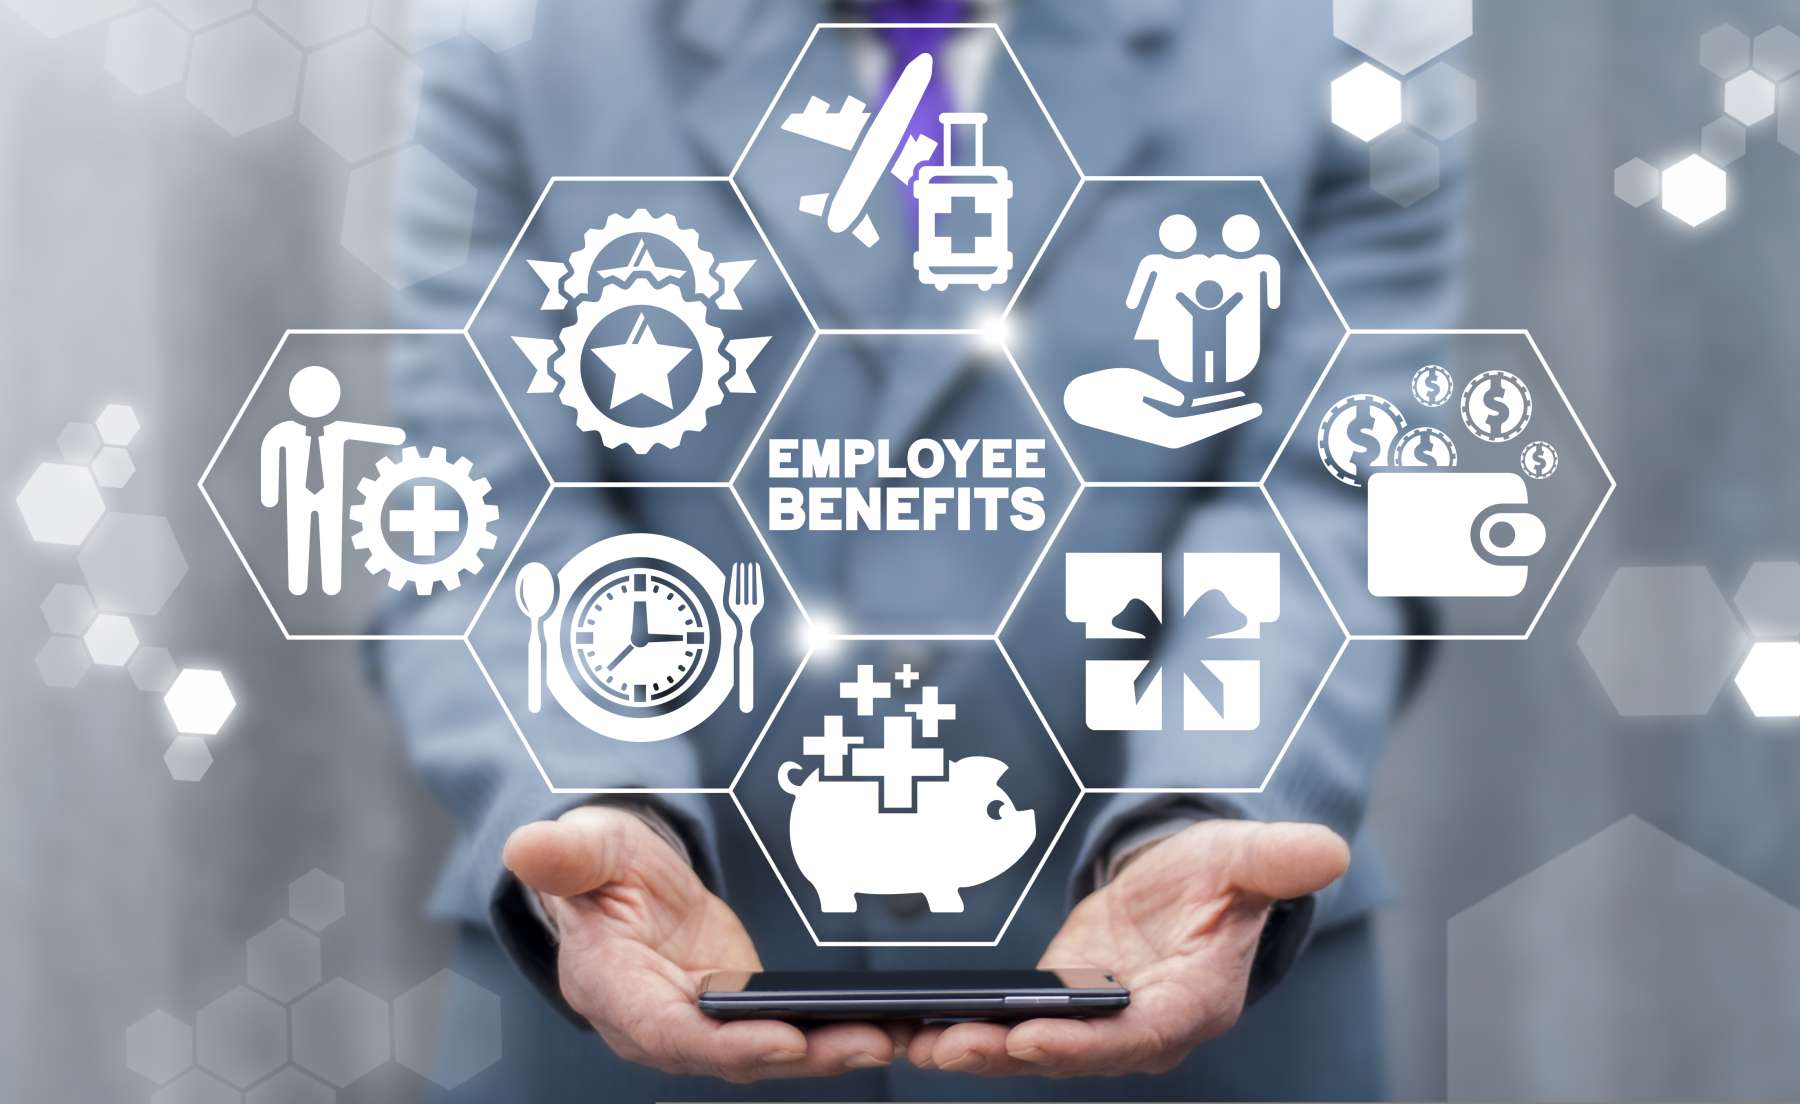 Using Employee Benefits to Attract & Retain Top Talent